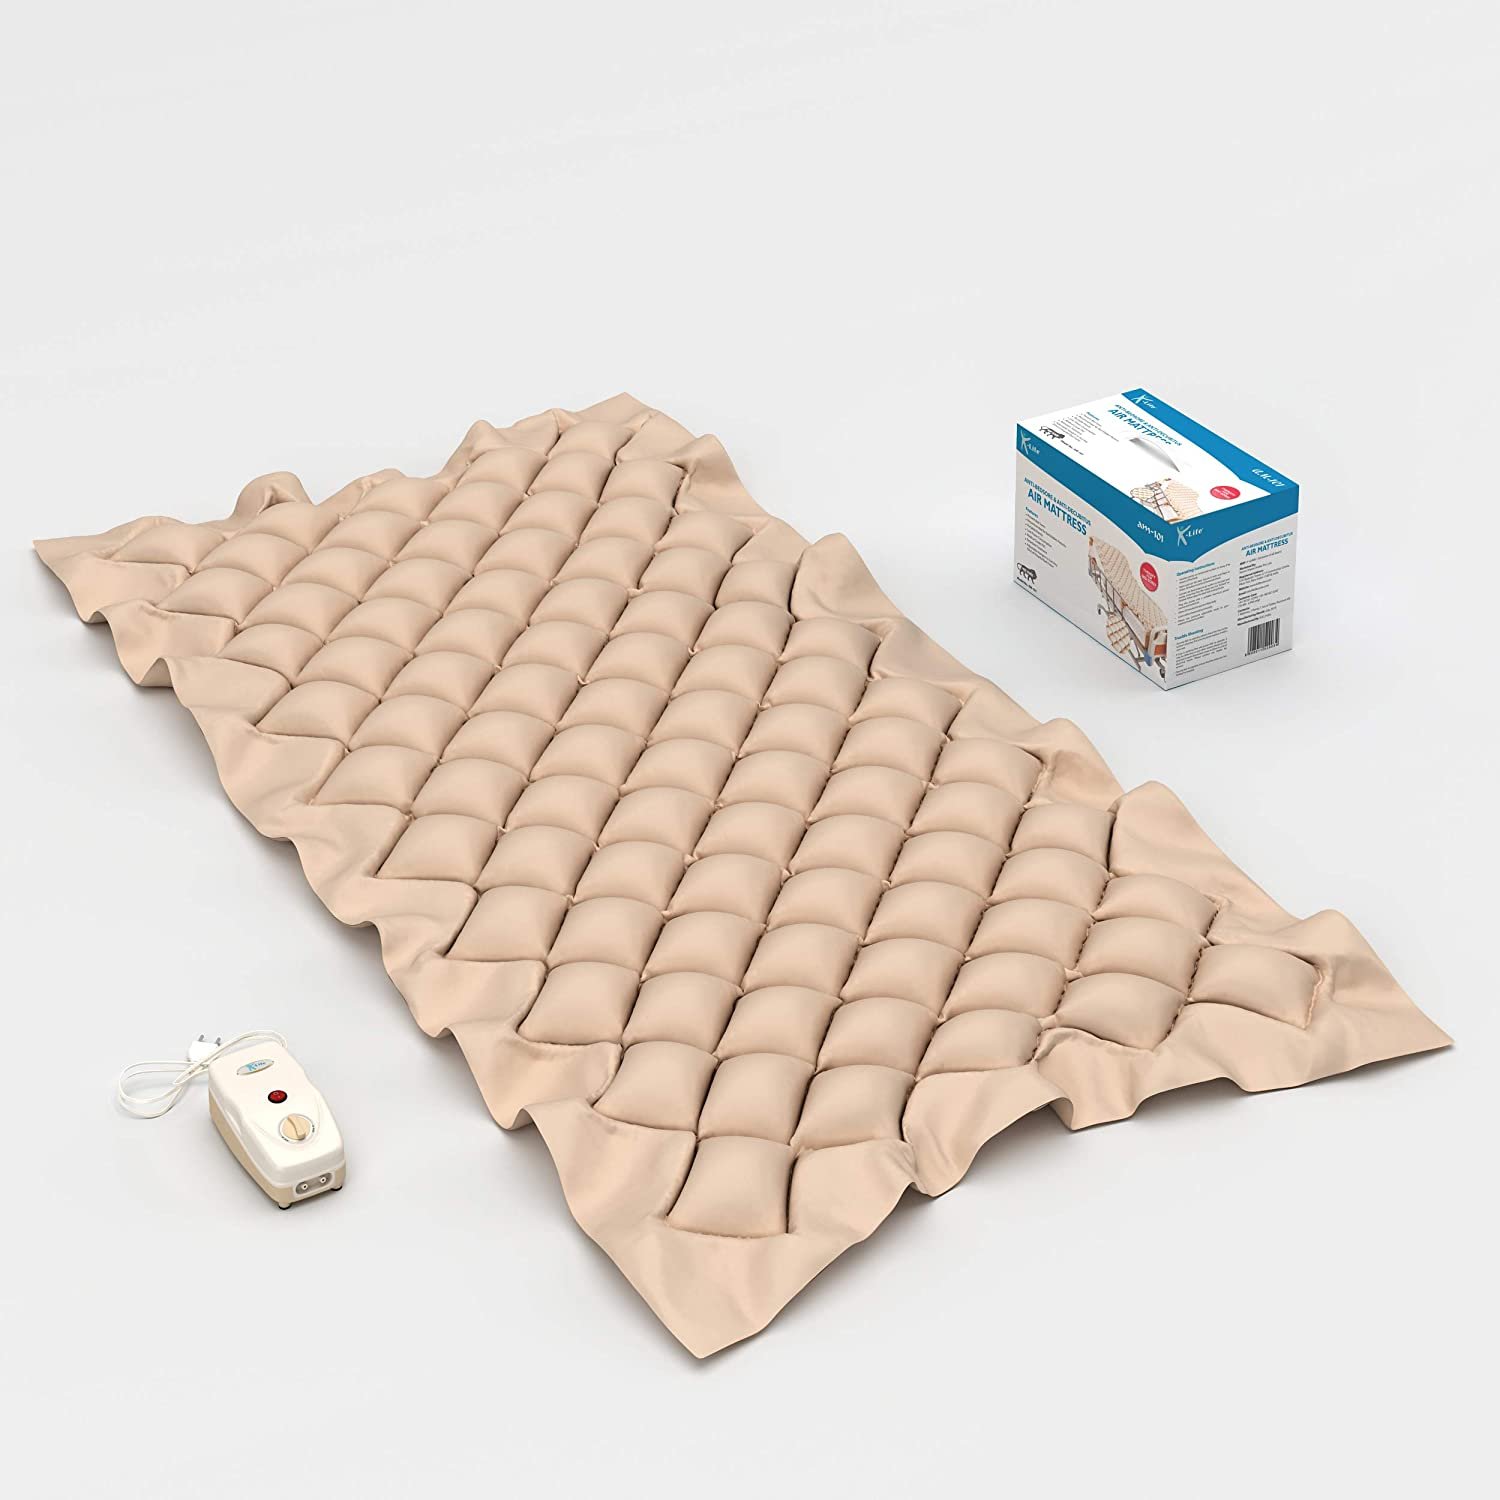 K-Life AM-101 Anti Bed Sore Air Mattress with free and storage pouch for pump